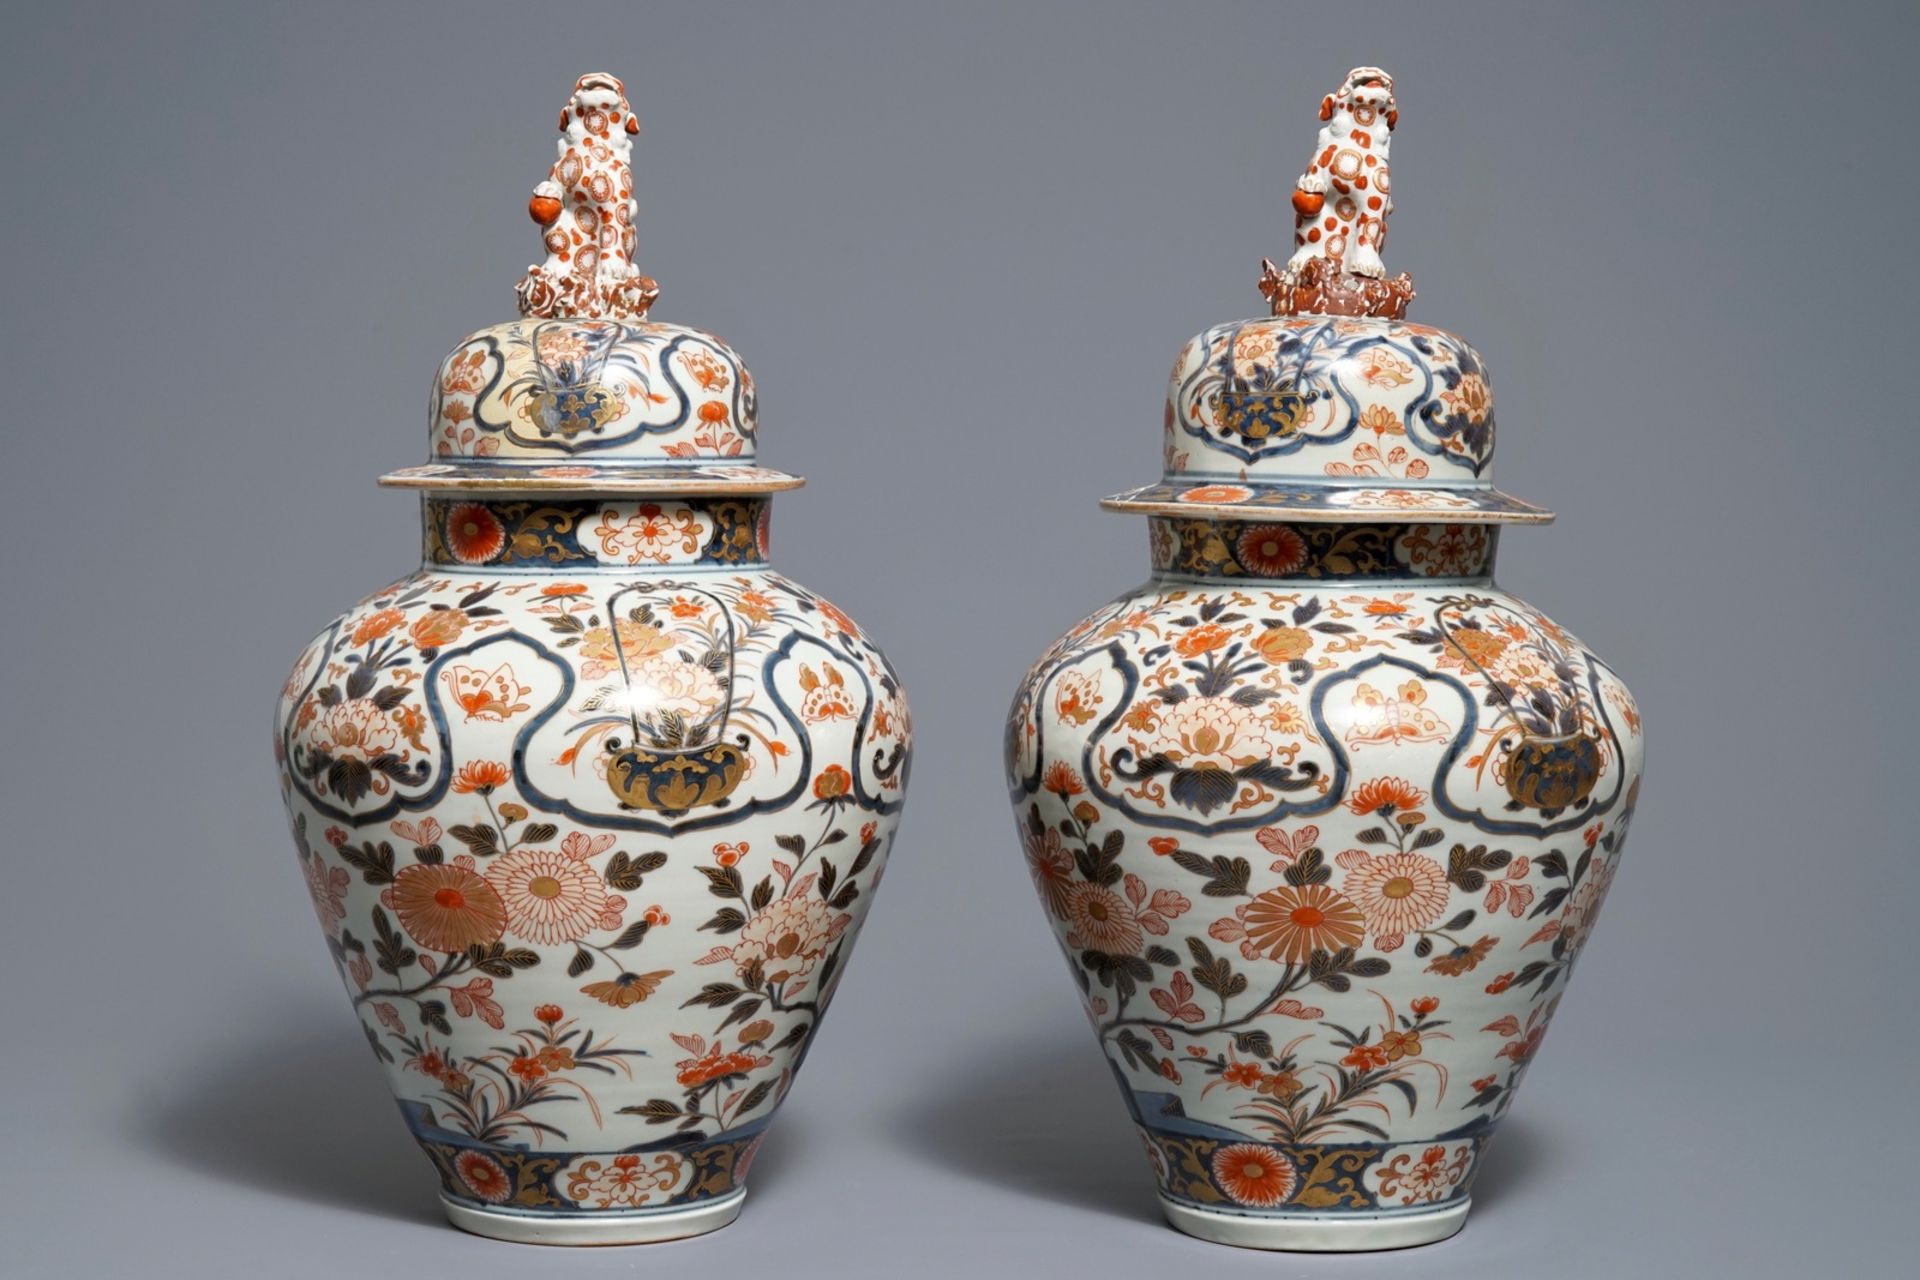 A pair of Japanese Imari vases and covers with floral design, Edo, 17th C. - Image 4 of 6